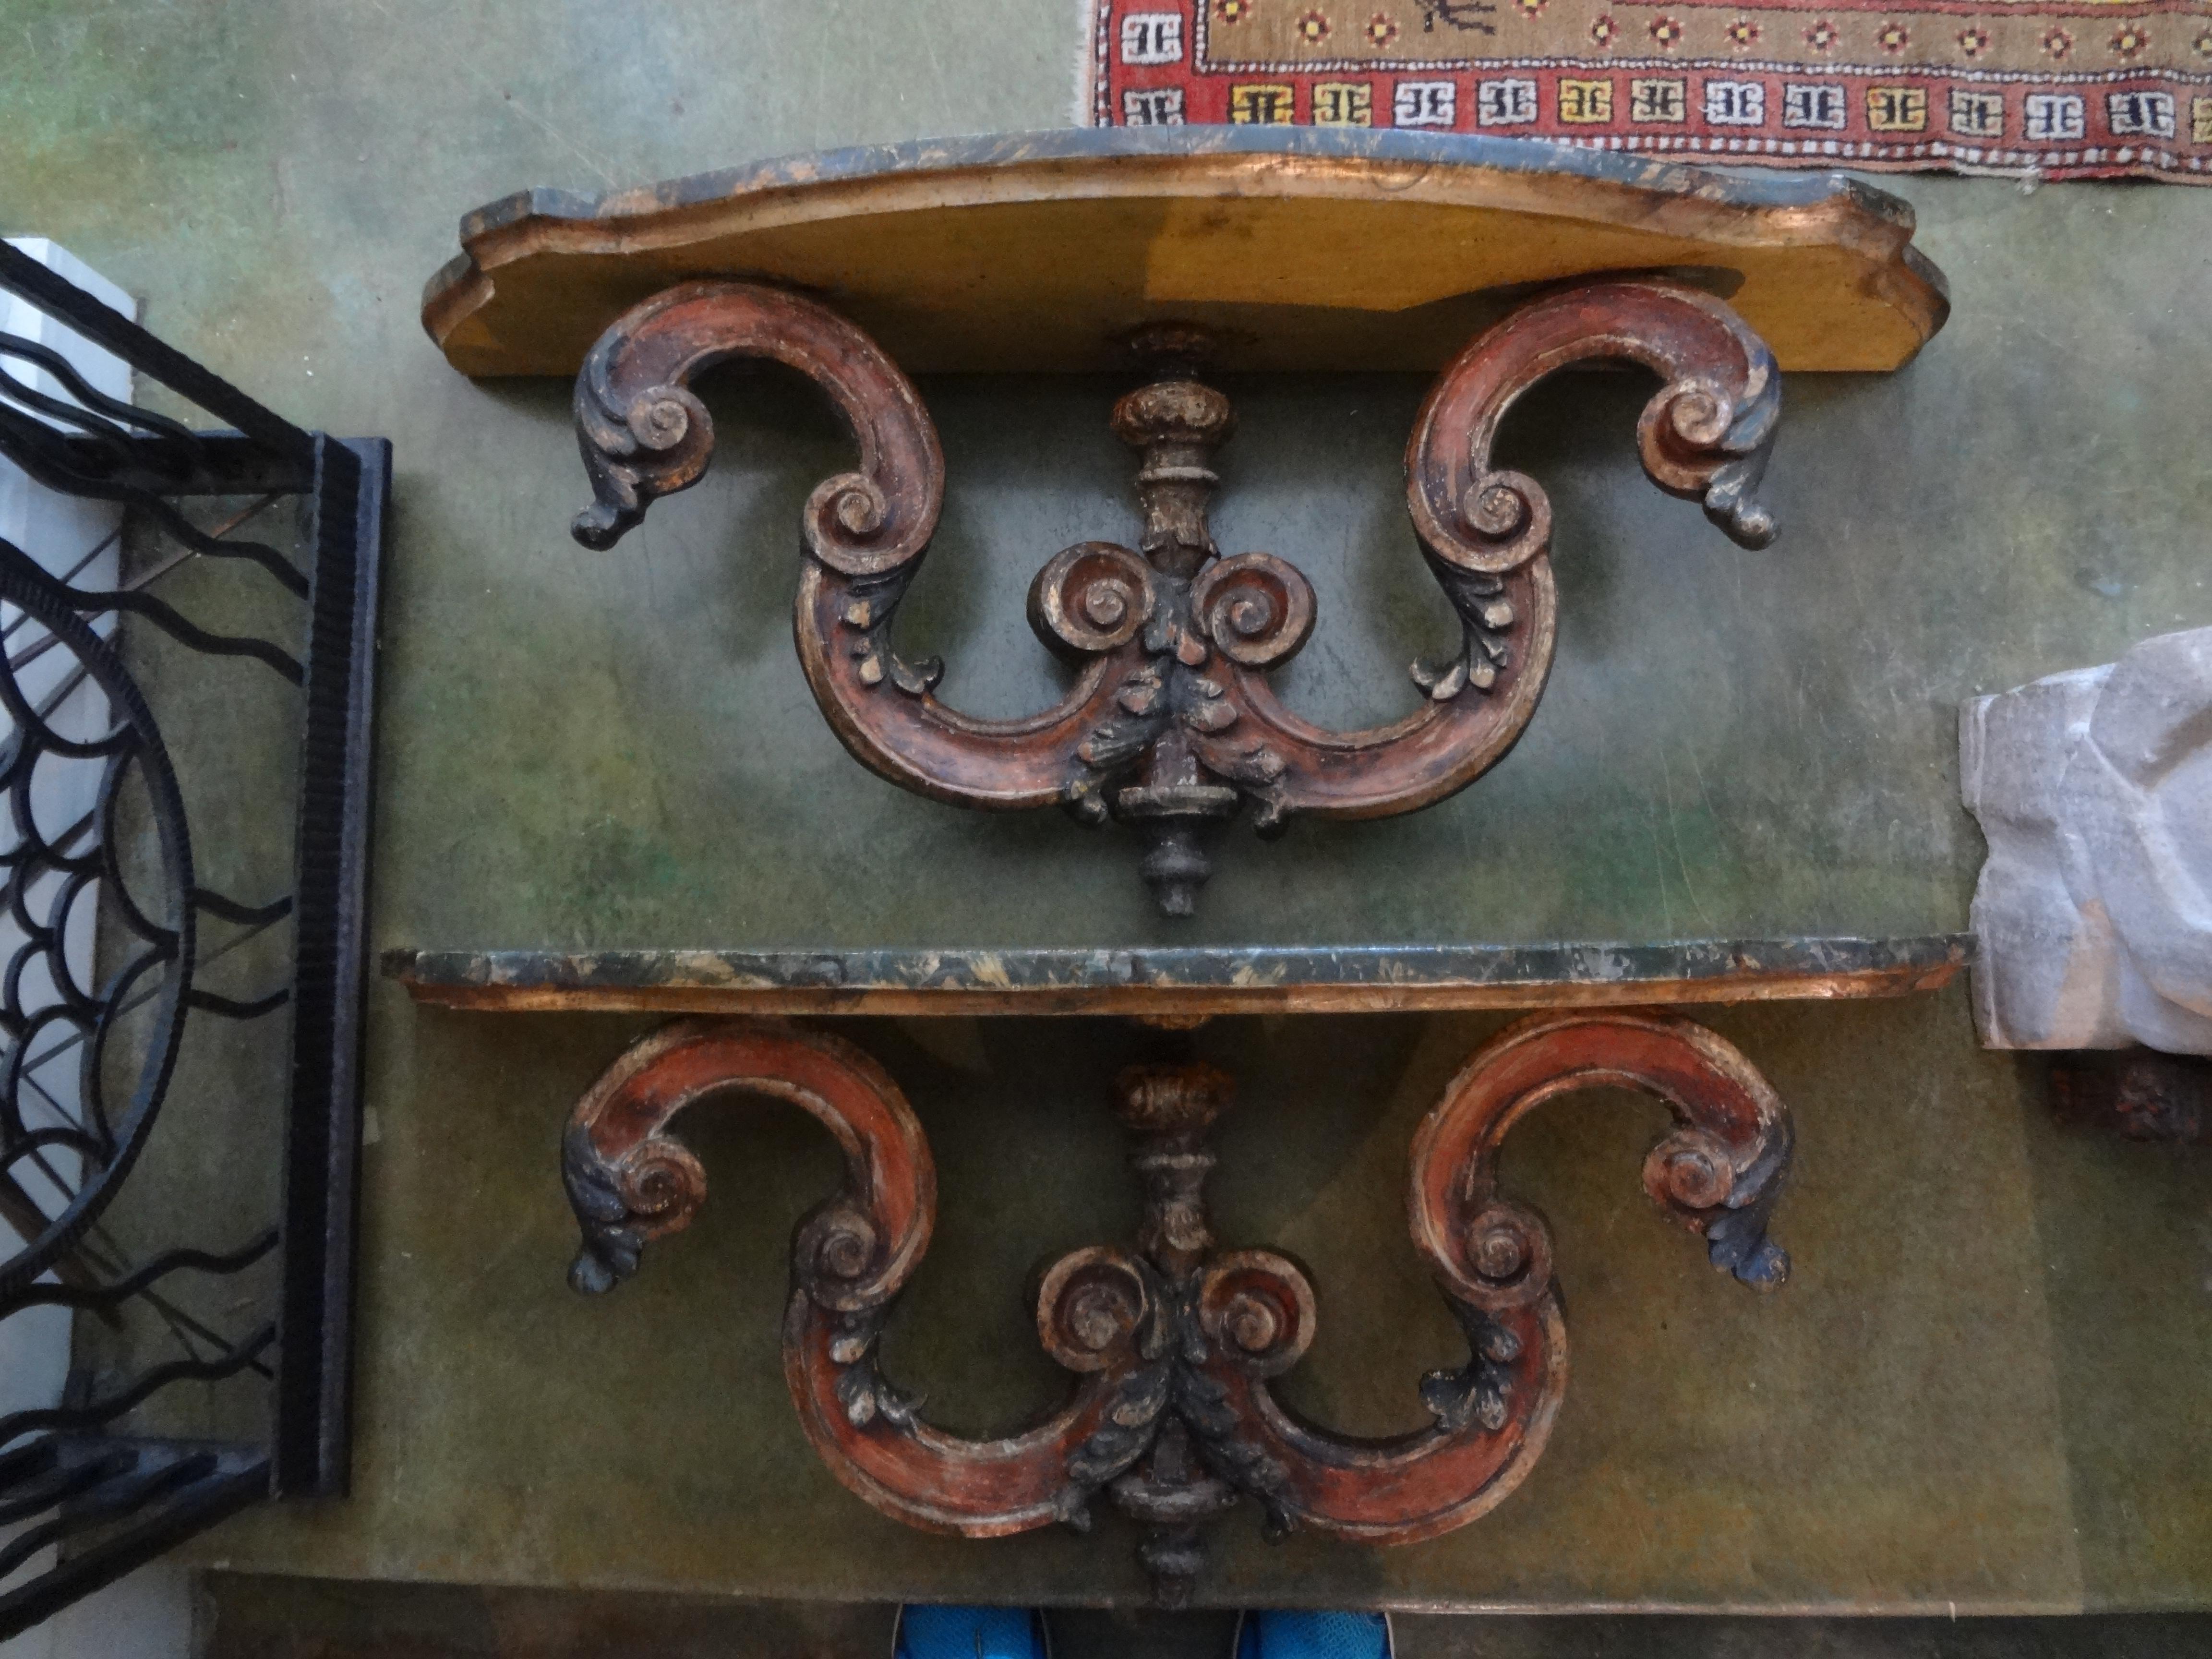 Pair of Italian carved and Polychrome wall brackets.
Fabulous huge pair of Italian carved and polychrome wall brackets, wall shelves or wall consoles. These great Tuscan wall brackets are executed in shades of greens, golds and reds with beautiful